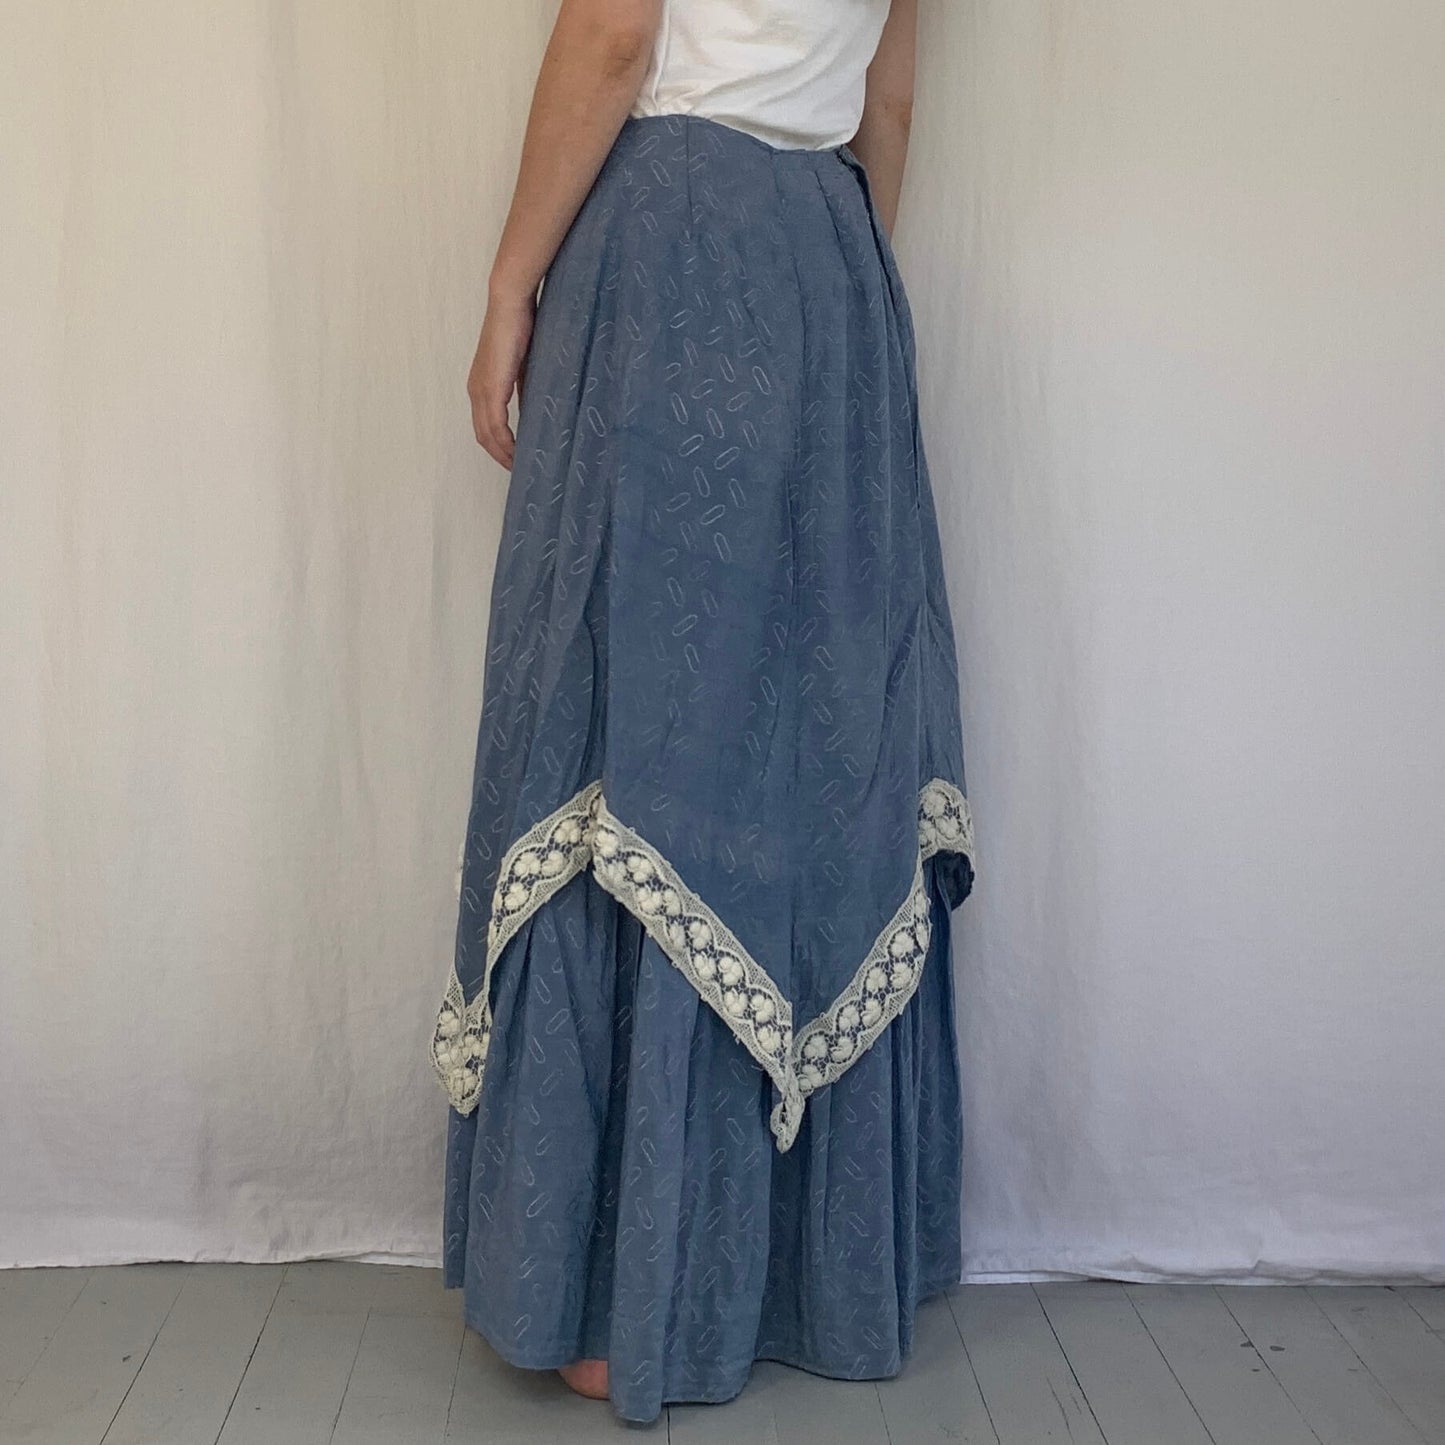 back view of edwardian skirt